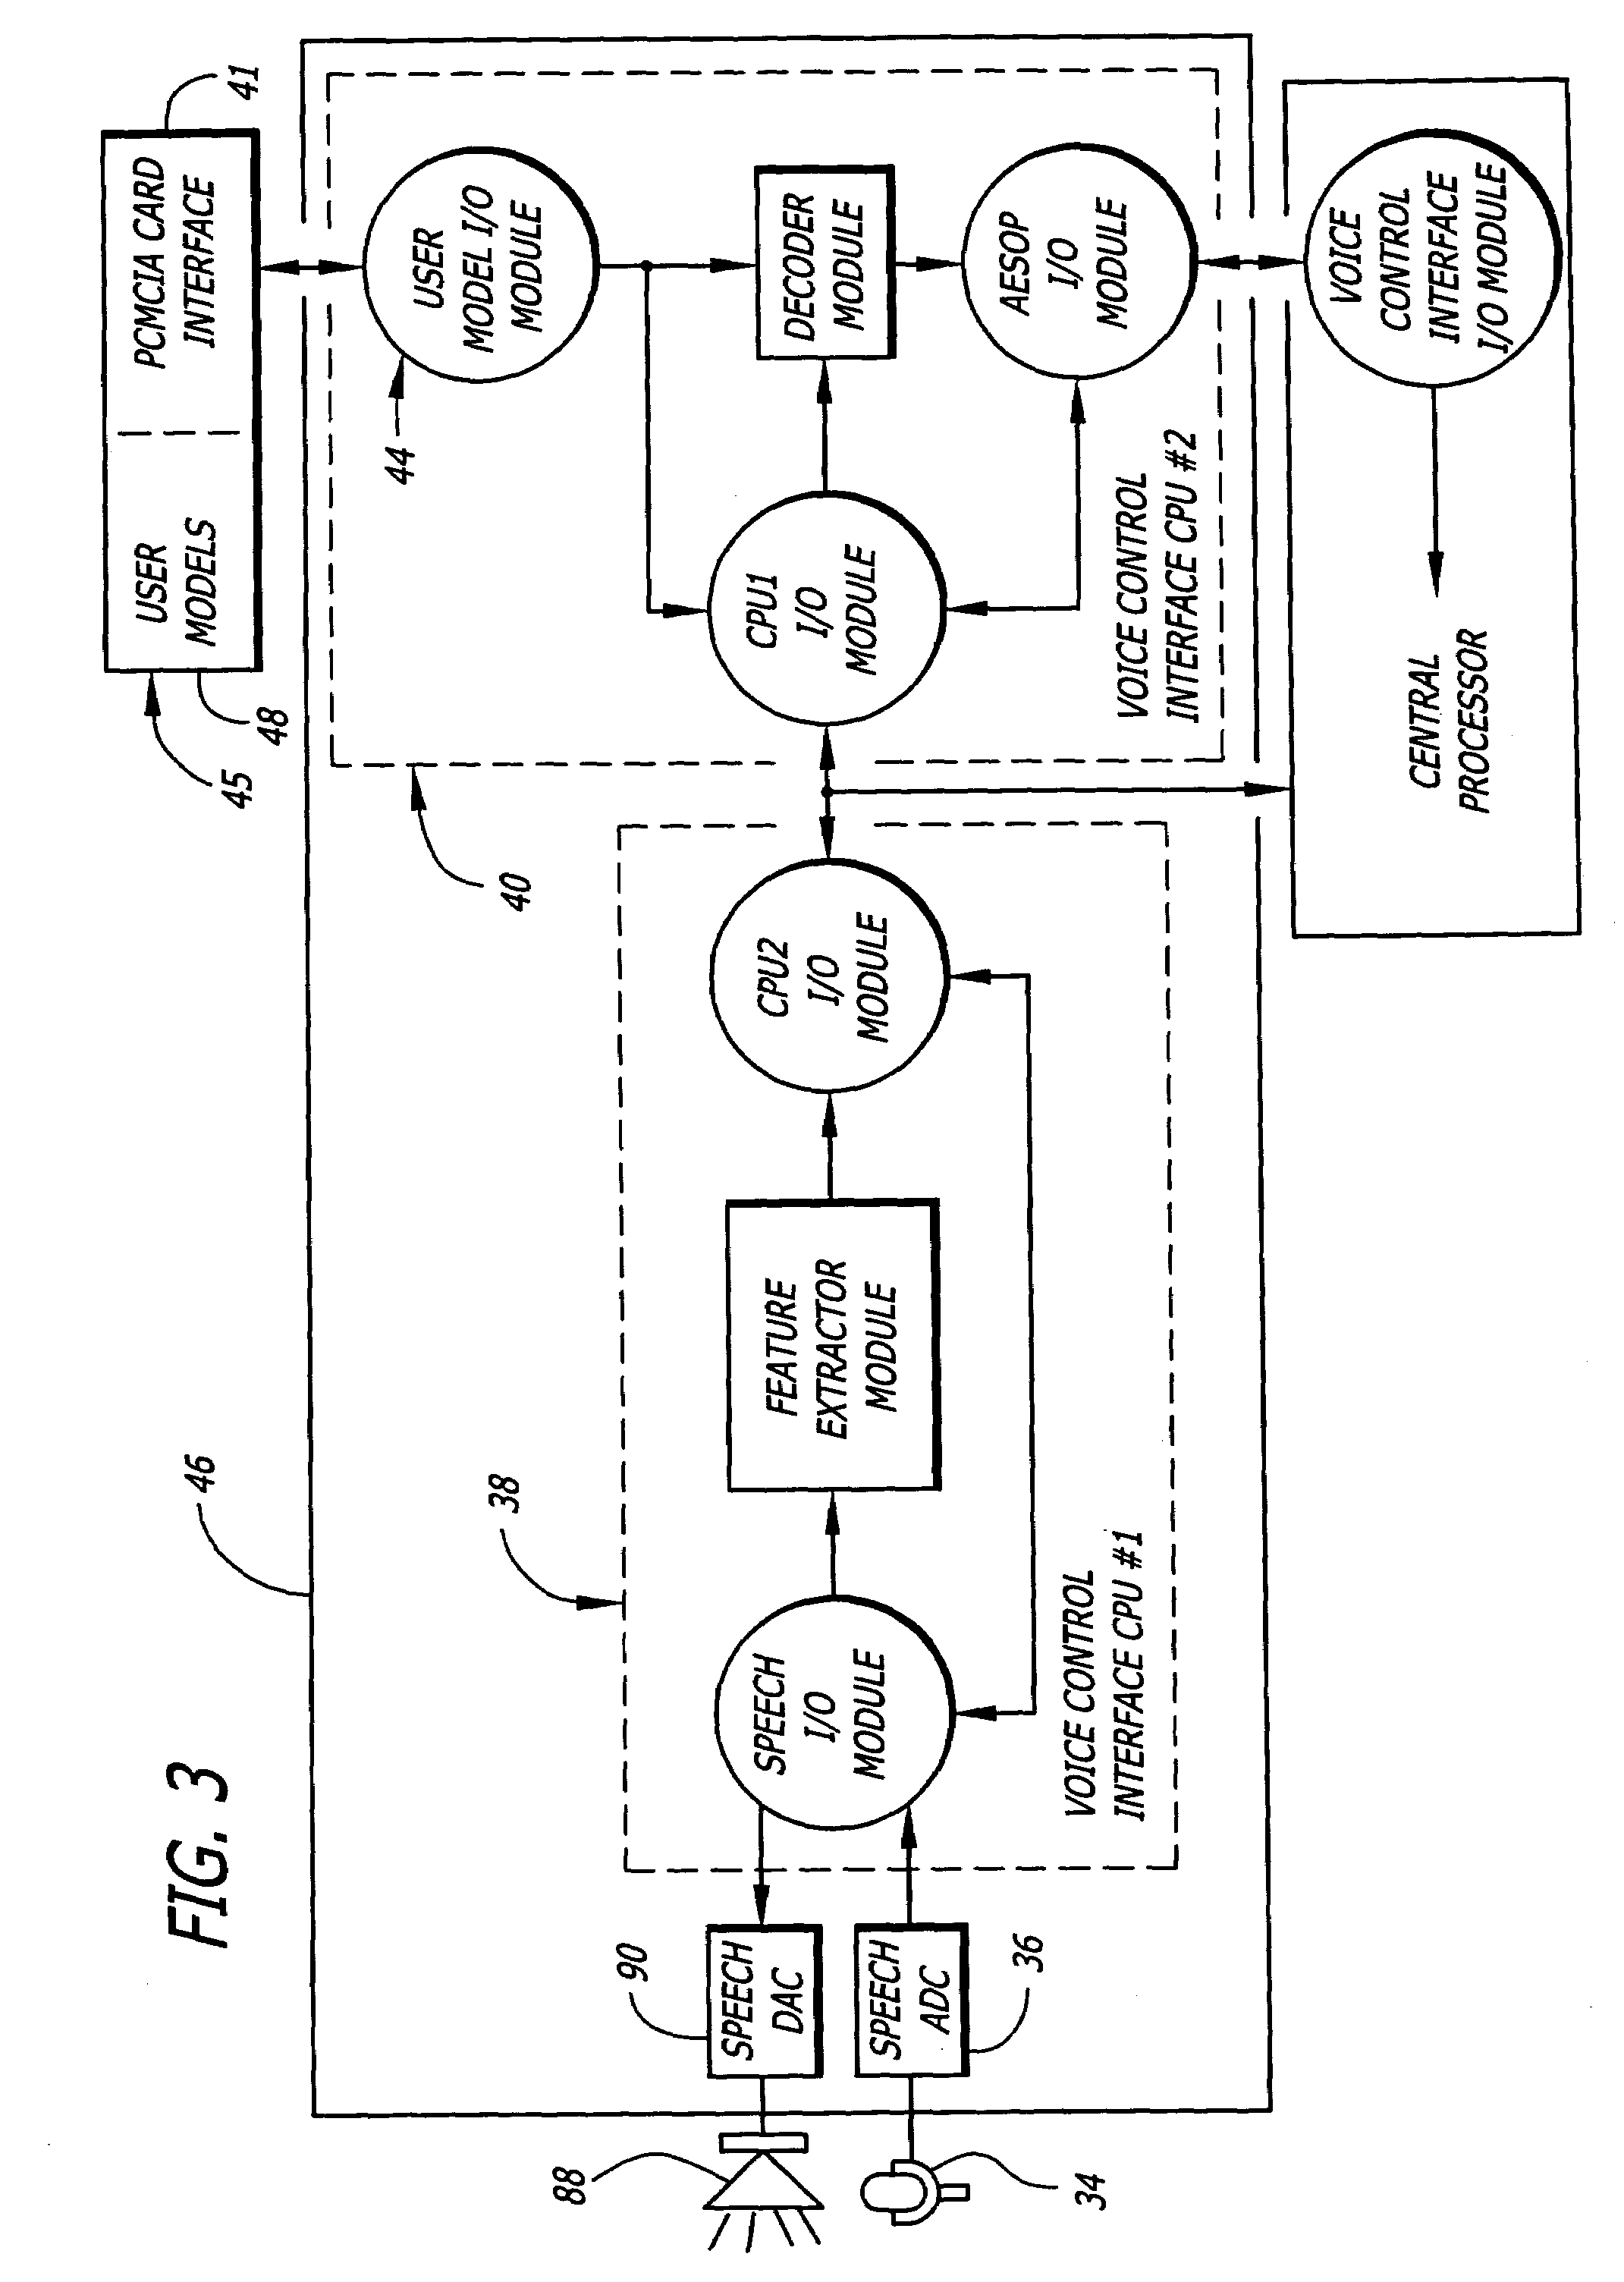 General purpose distributed operating room control system